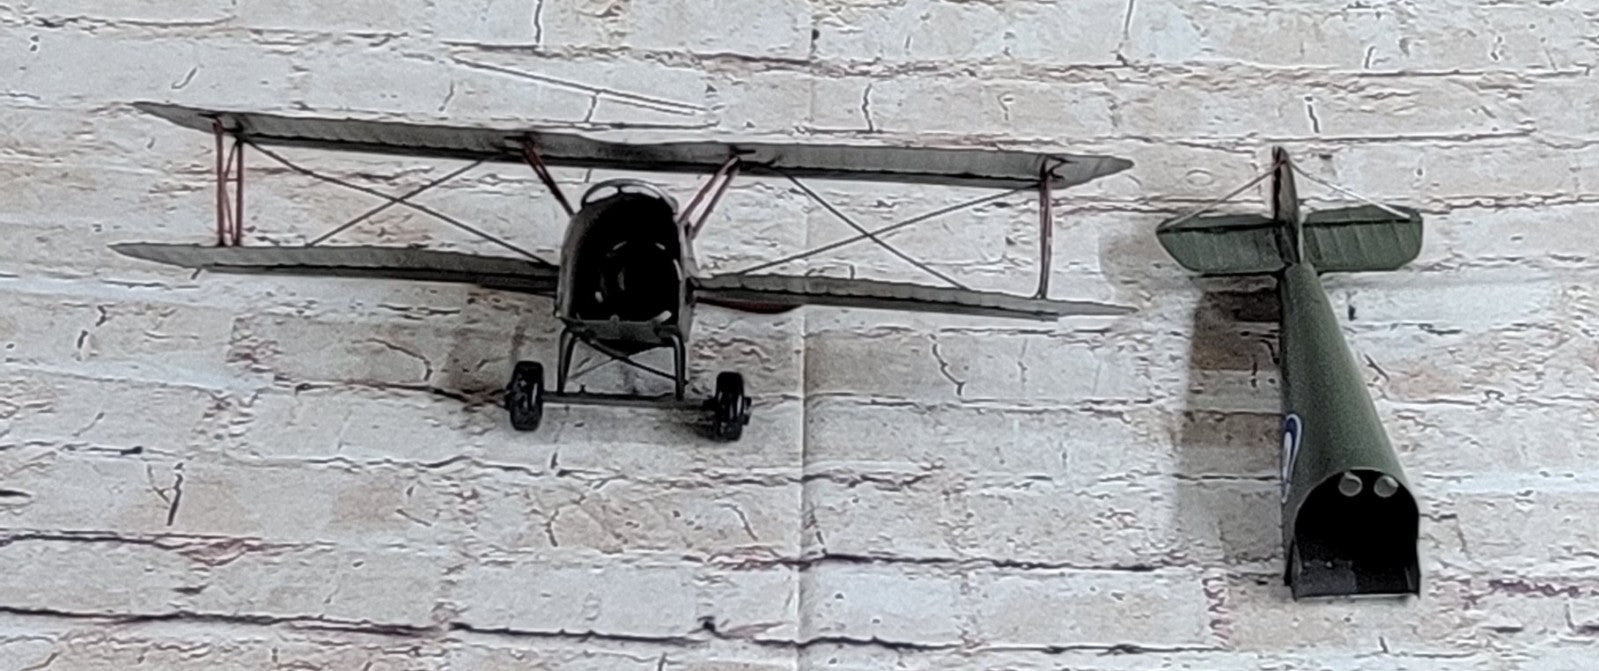 High Quality Handmade Vintage Metal Crafts Airplane Model For Decoration